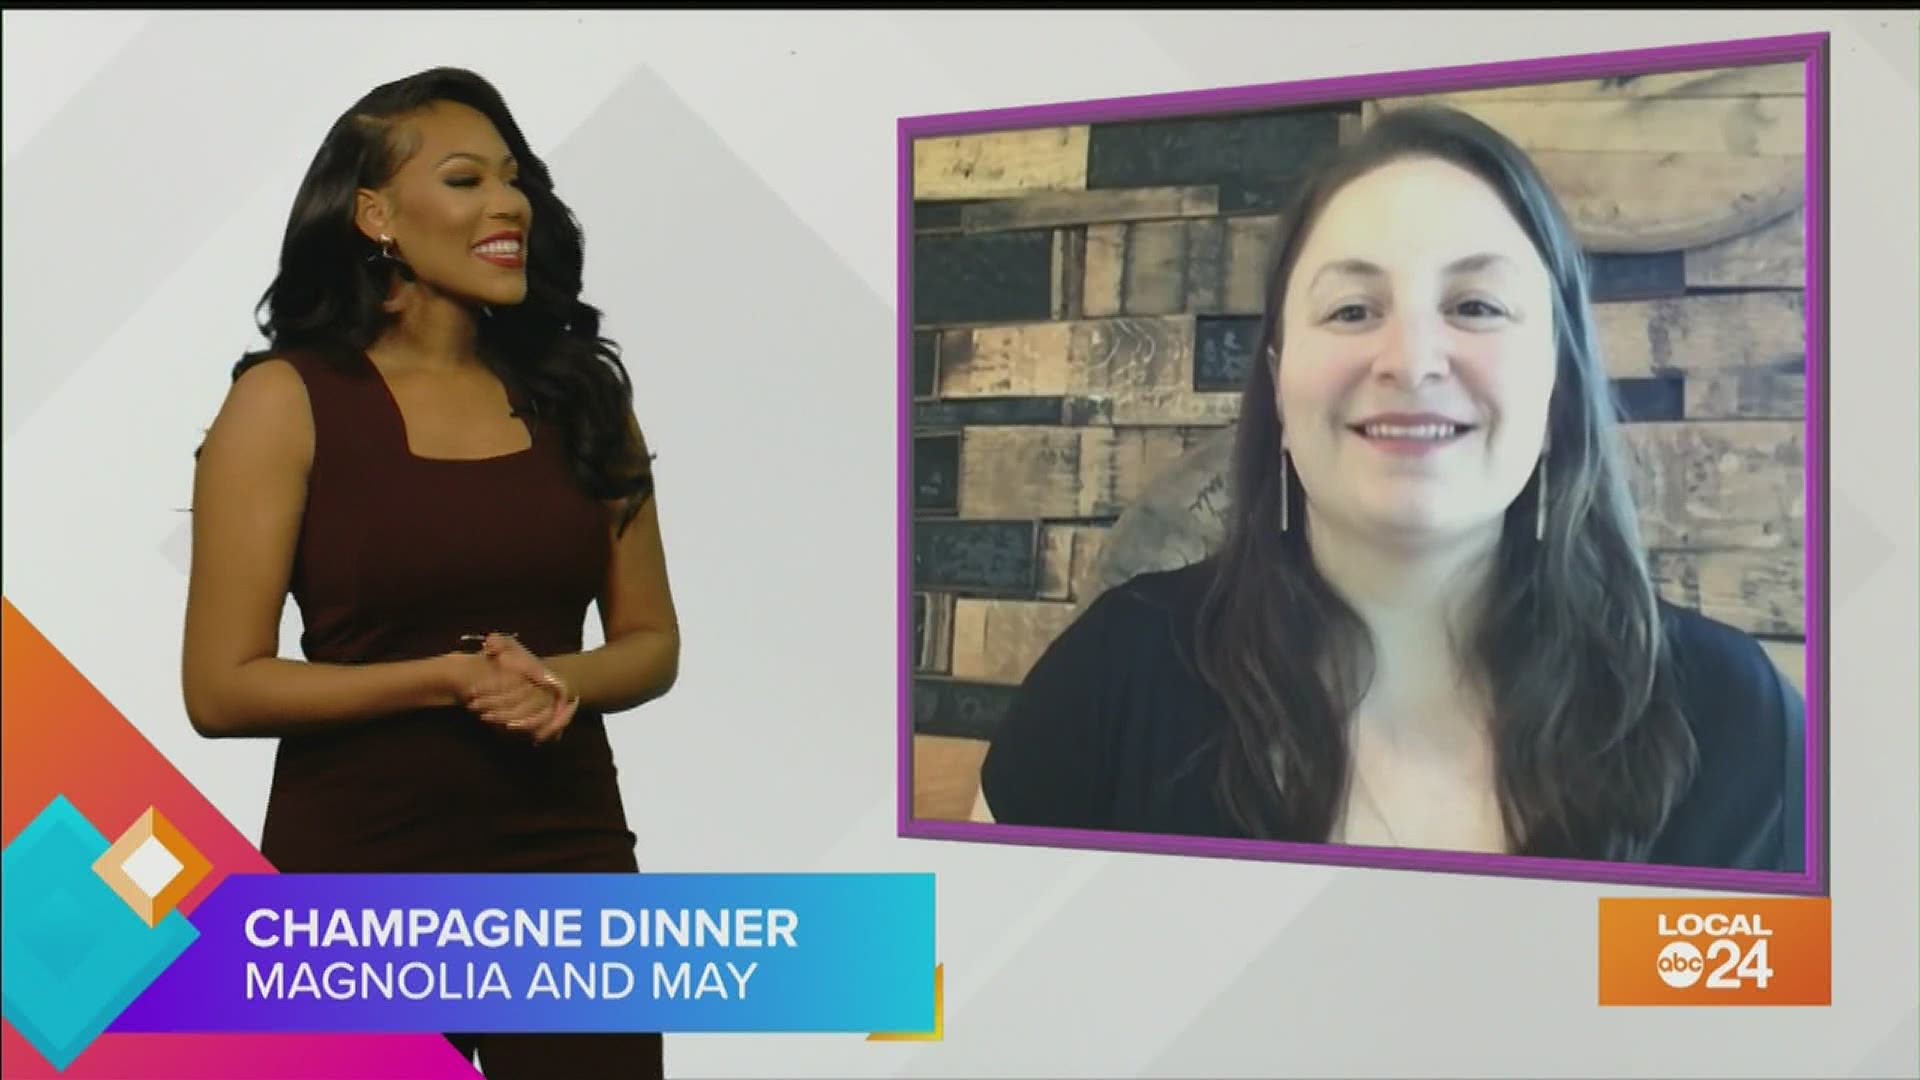 Come explore Magnolia and May, this local “country brasserie” with your host Sydney Neely. Join the conversation!